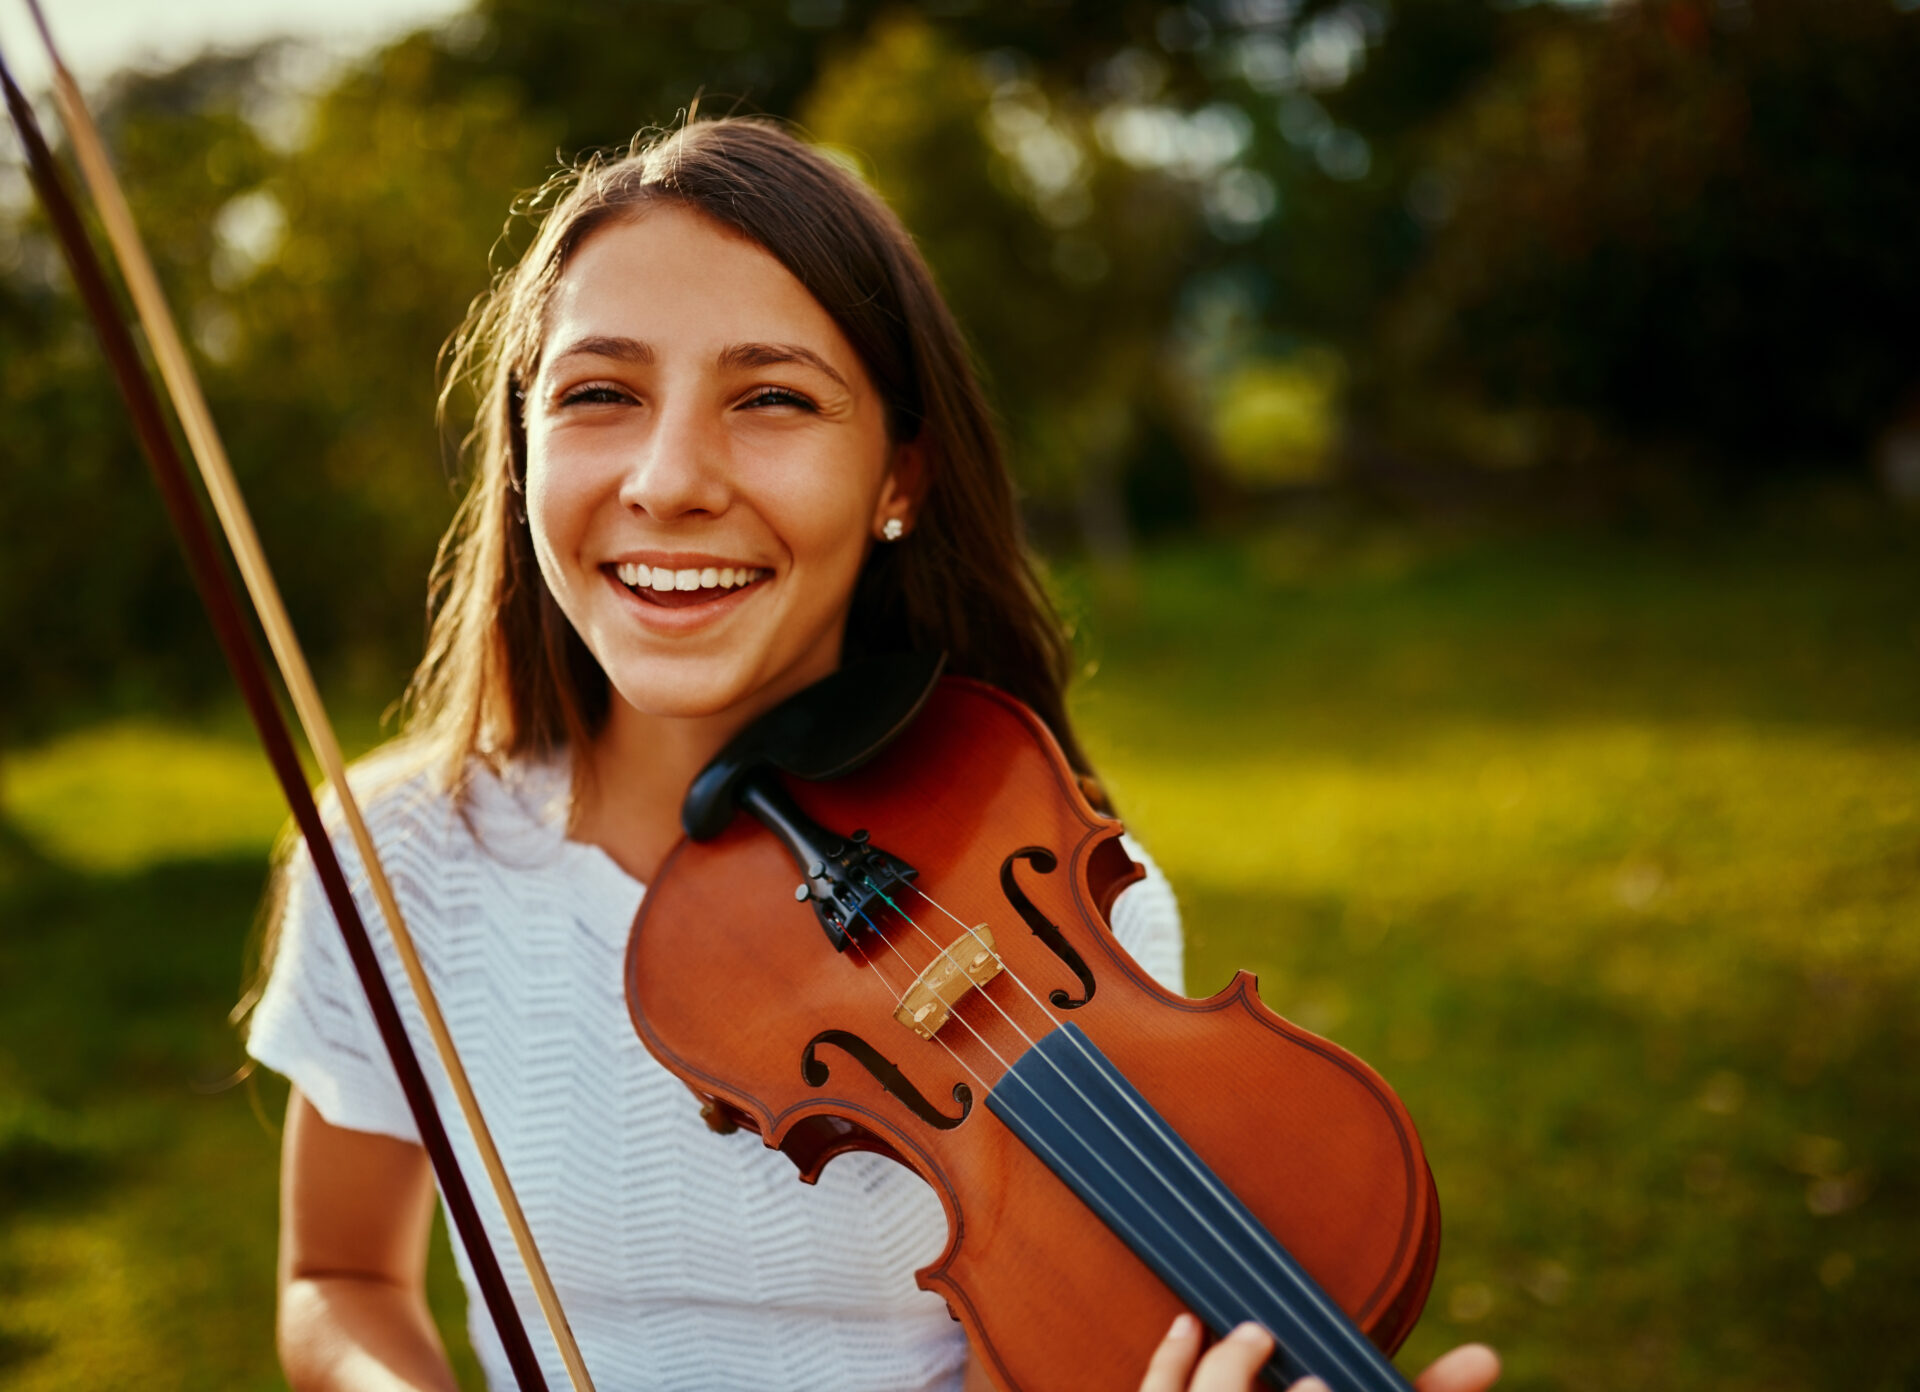 Cropped shot of a young girl playing a violin outdoors.